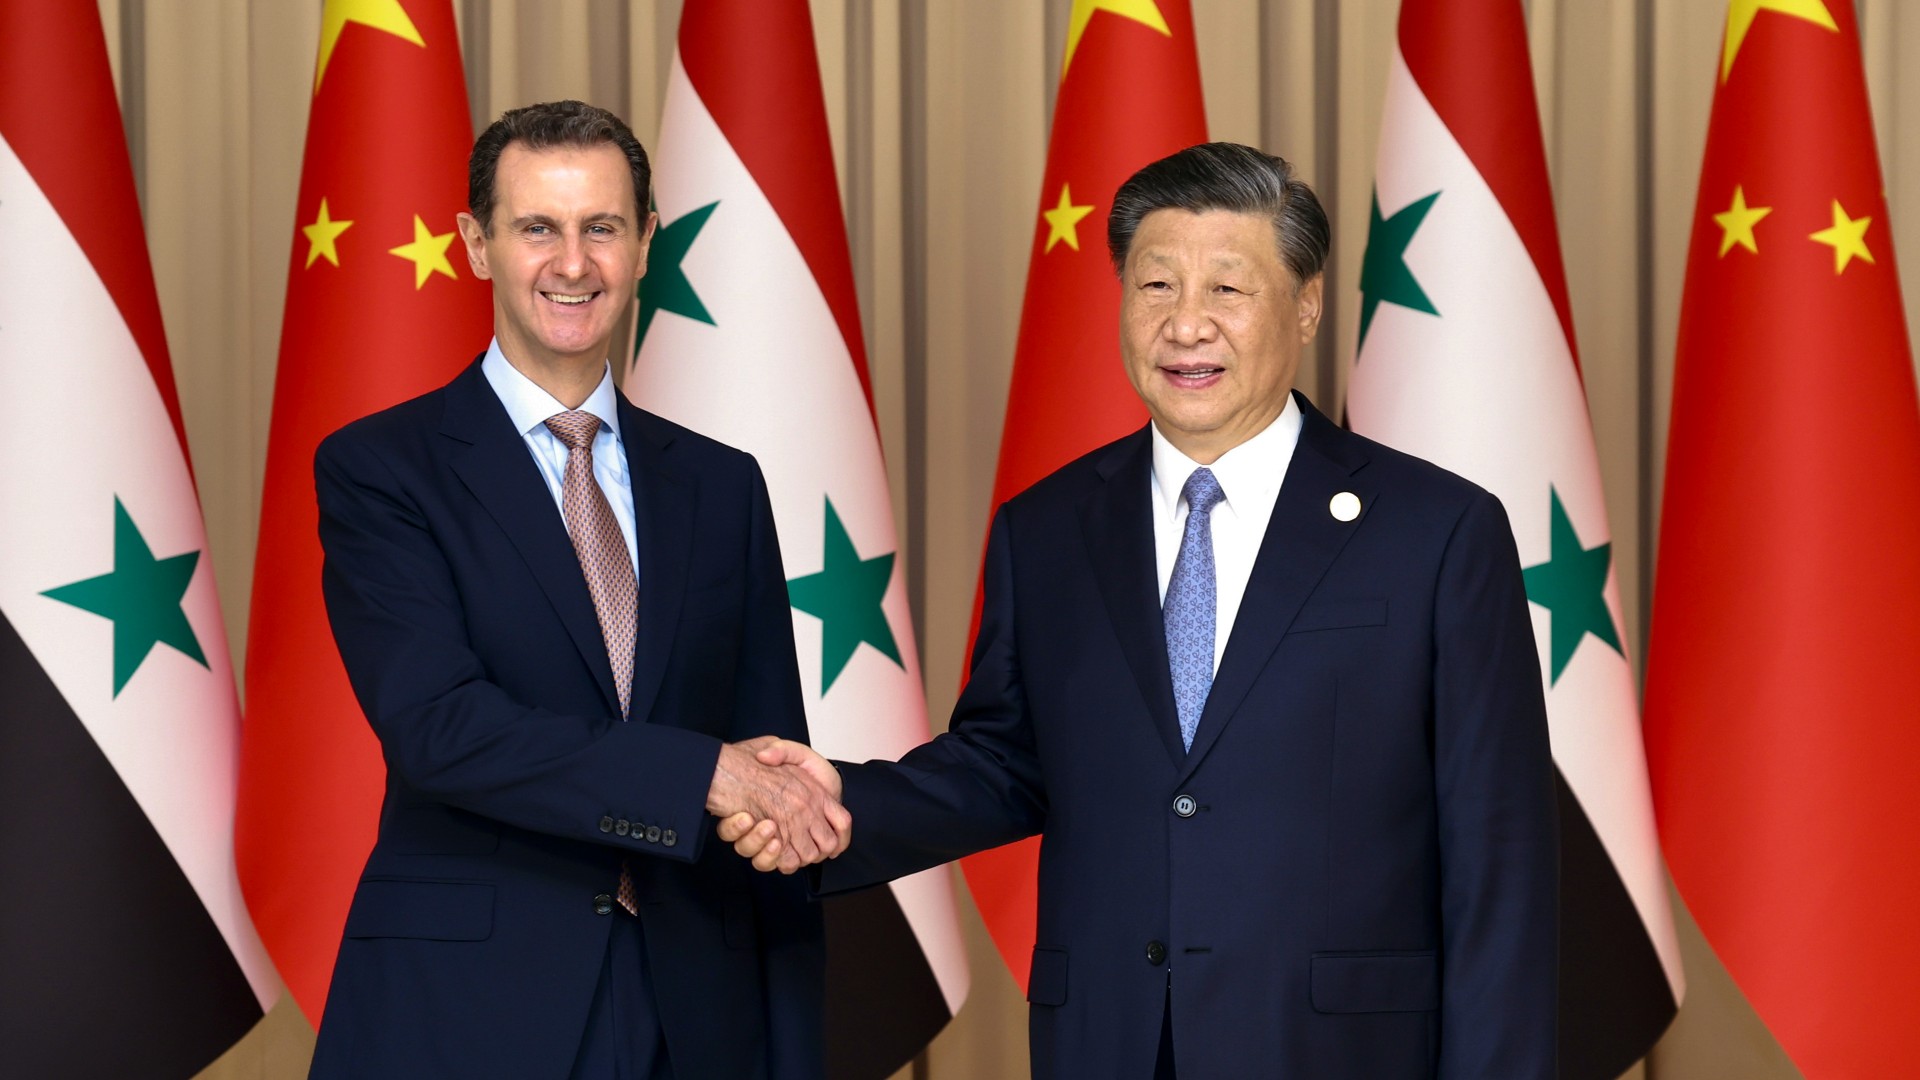 Chinese President Xi Jinping, right, shakes hands with Syrian President Bashar Assad before their bilateral meeting in Hangzhou, China, 22 September (AP)